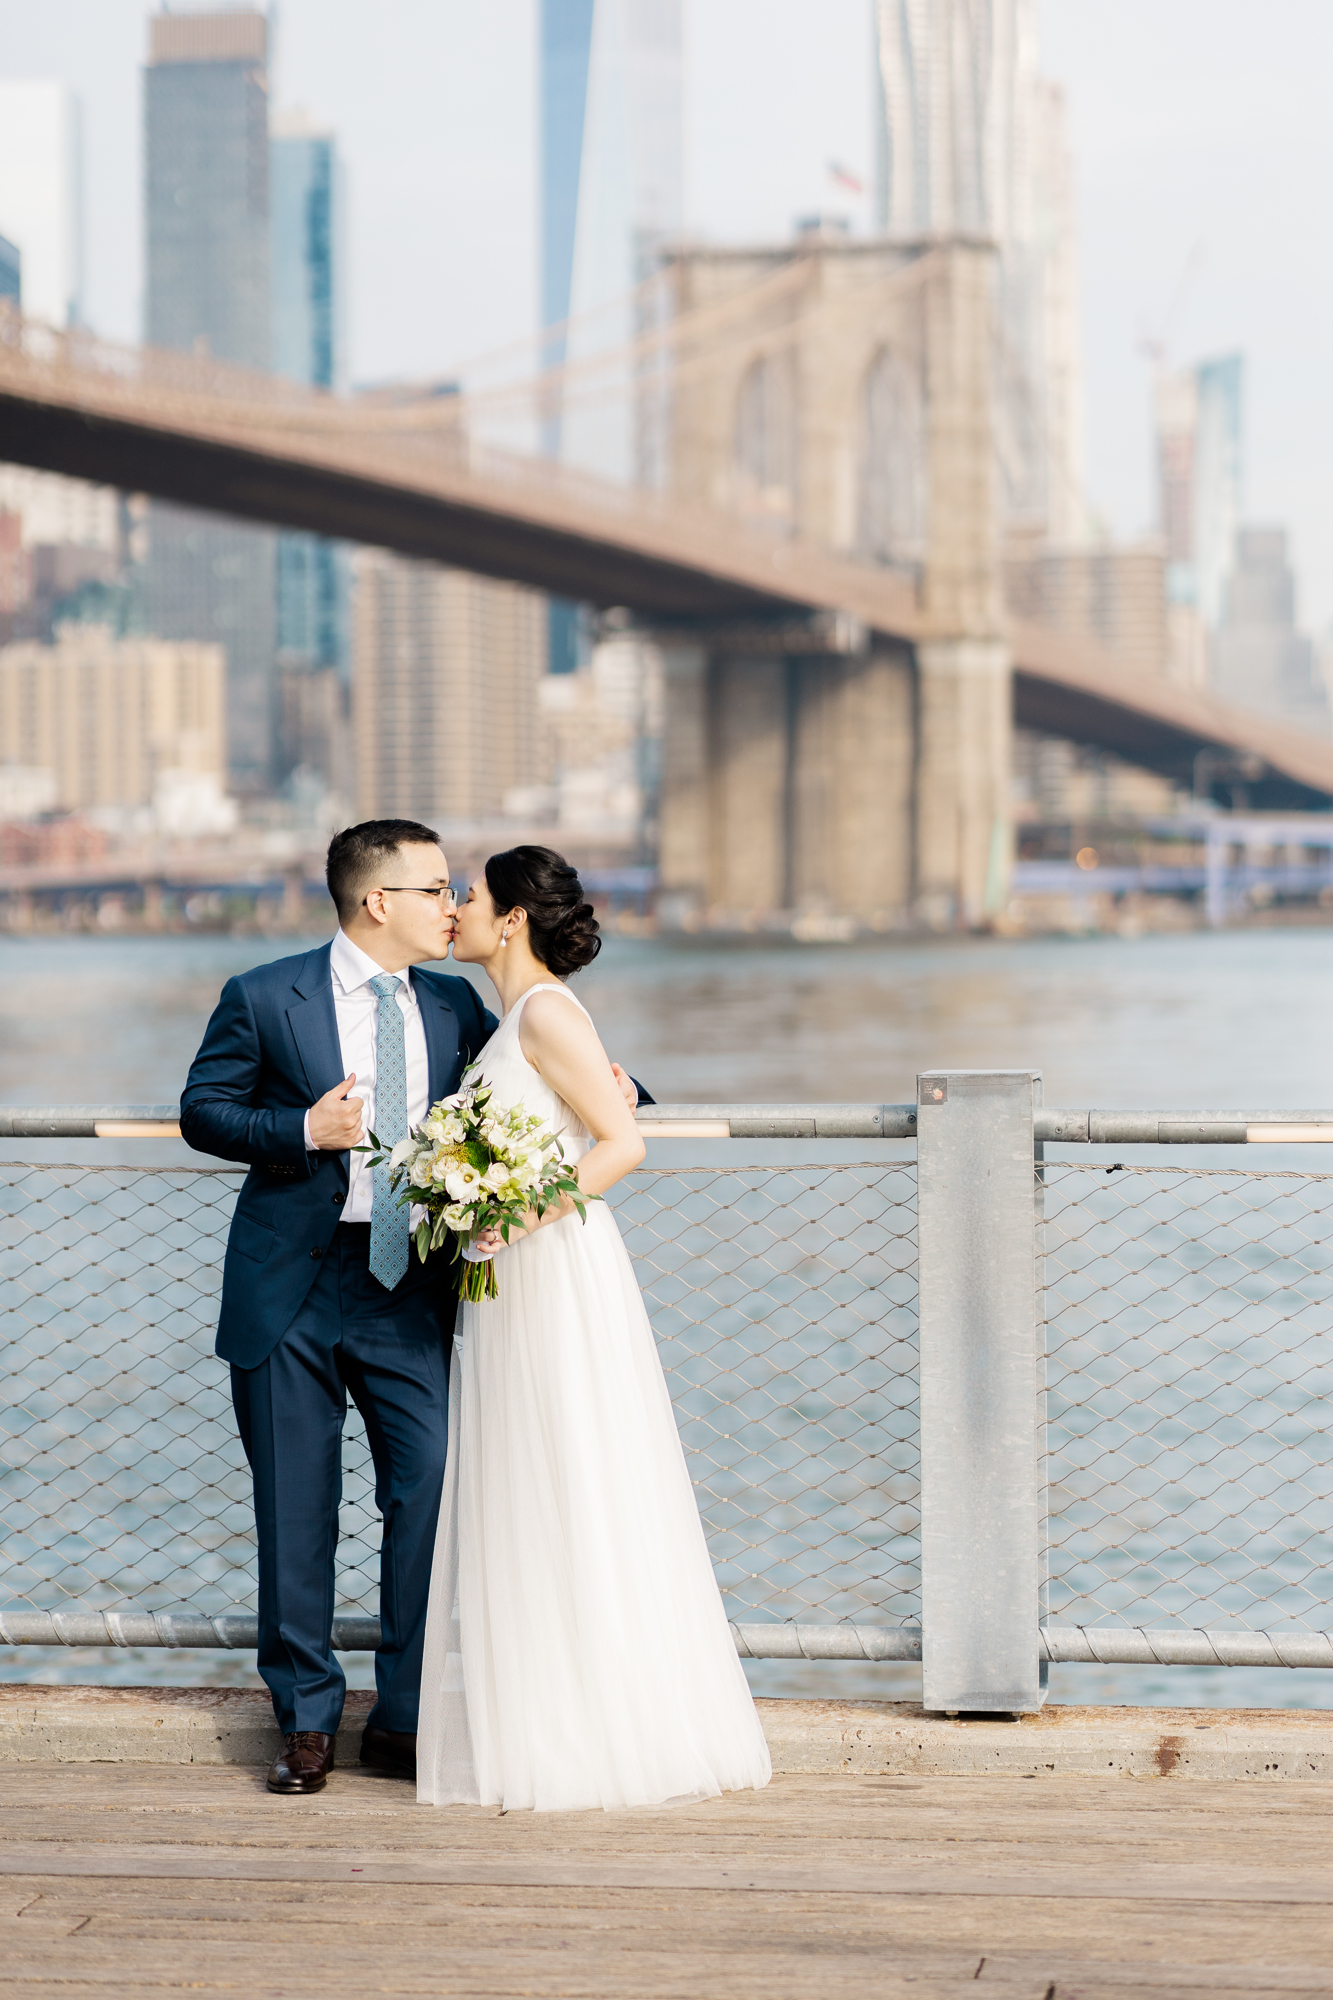 Fun Photos of New York Elopement in DUMBO and Central Park